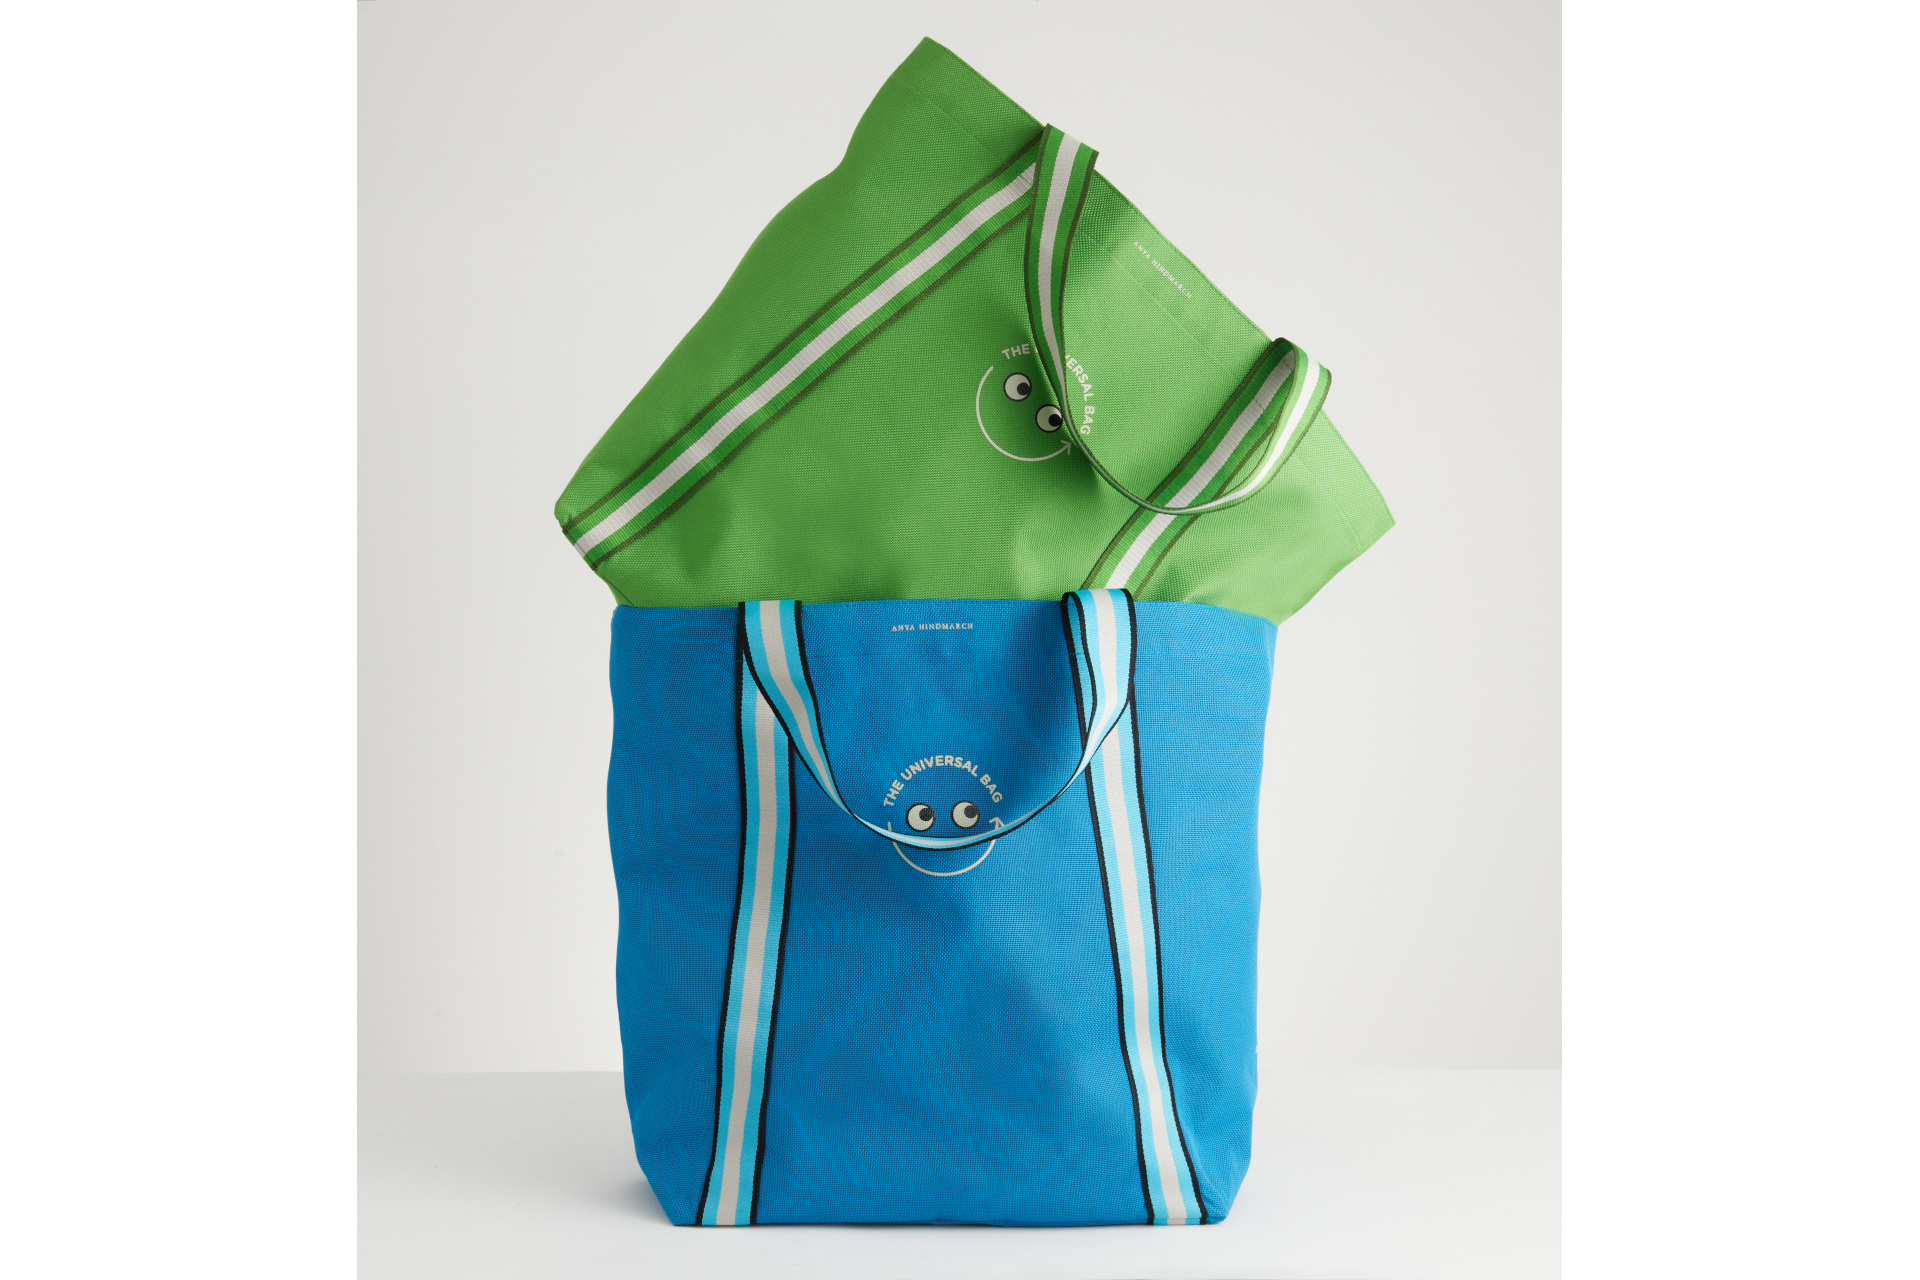 Green and blue bag stacked on top of each other